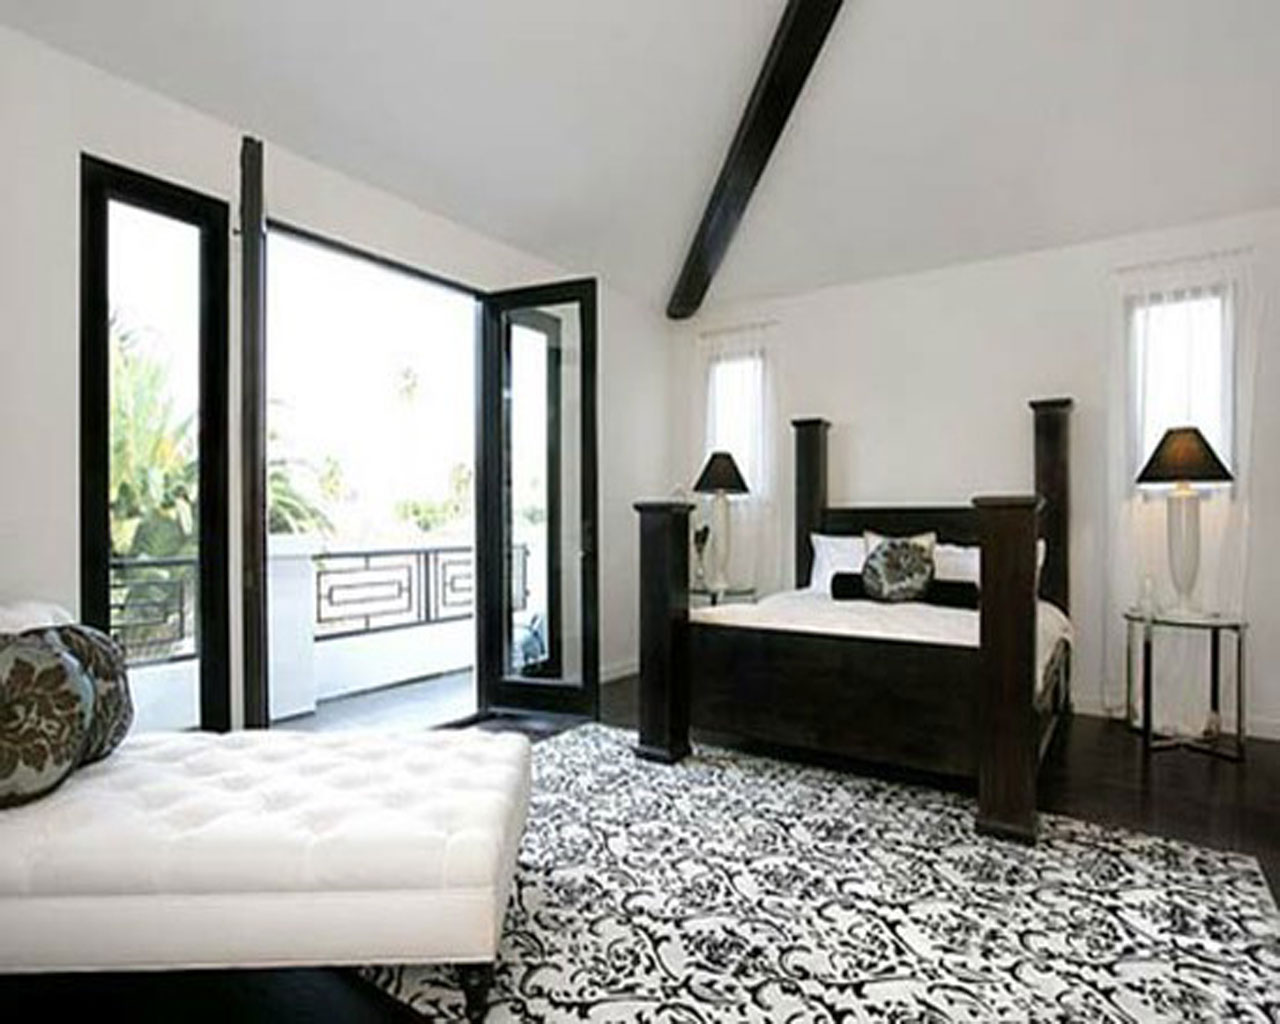 Bedroom Design Bed Stunning Bedroom Design With Black Bed Frame And White Lounge Chairs Bedroom 23 Marvelous Black And White Bedroom Design Full Of Personality